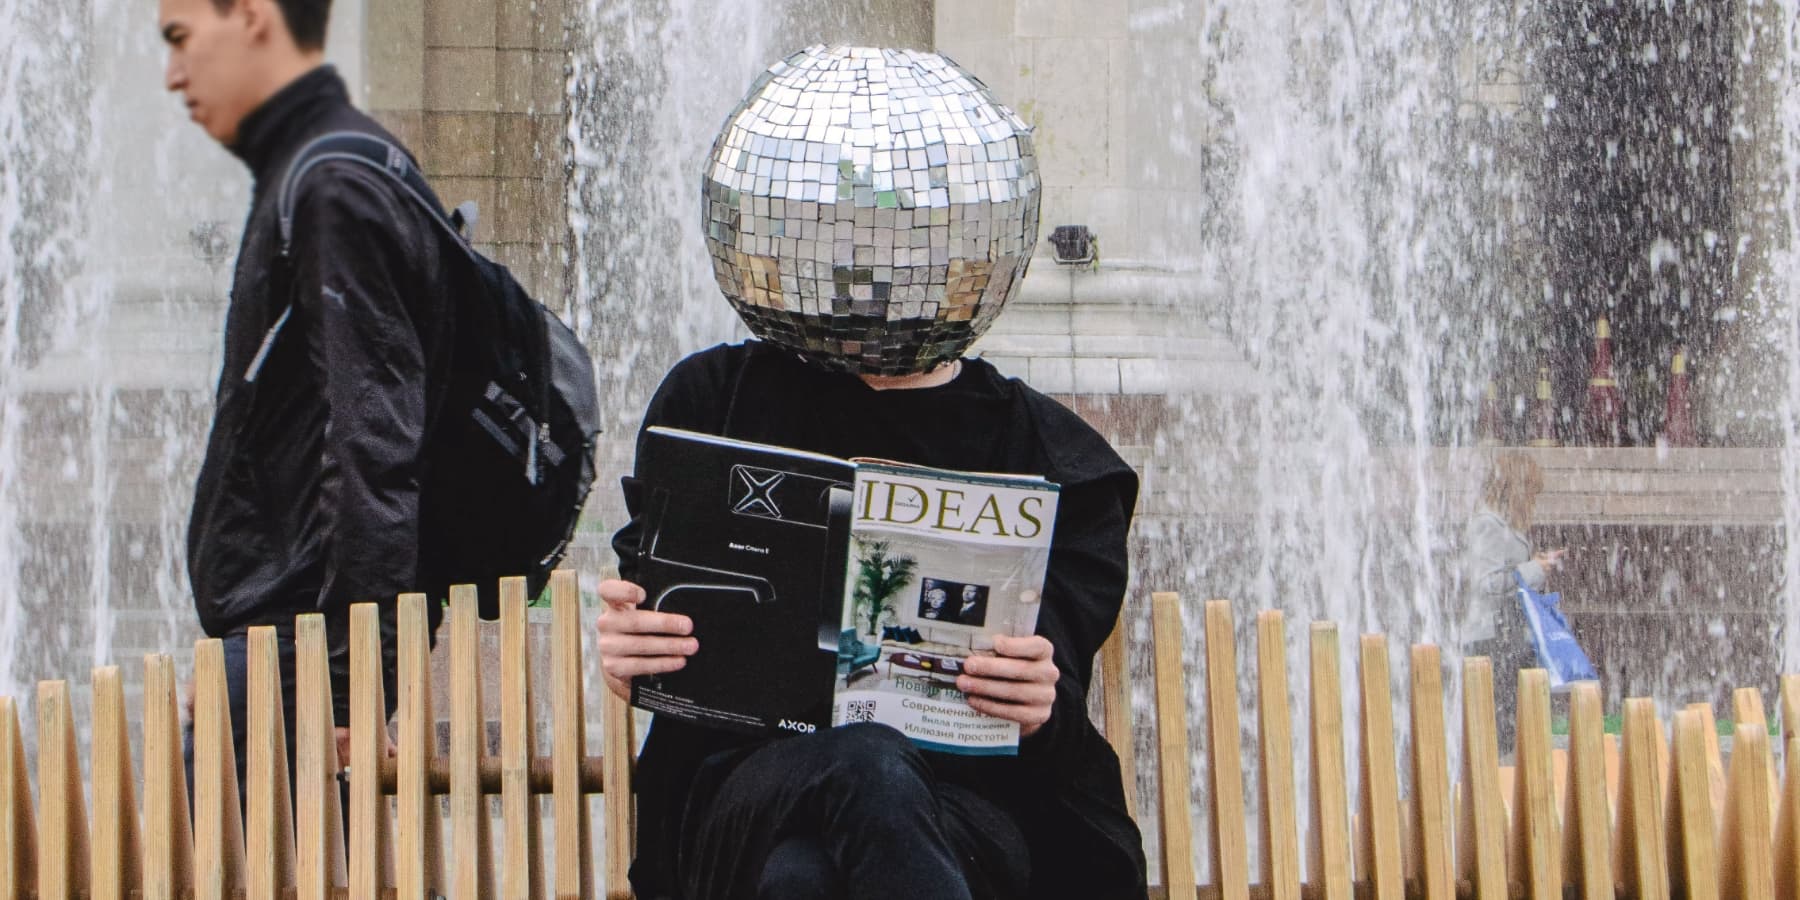 A person on a public bench with a disco / mirrored ball over their head, reading a magazine called 'Ideas'.